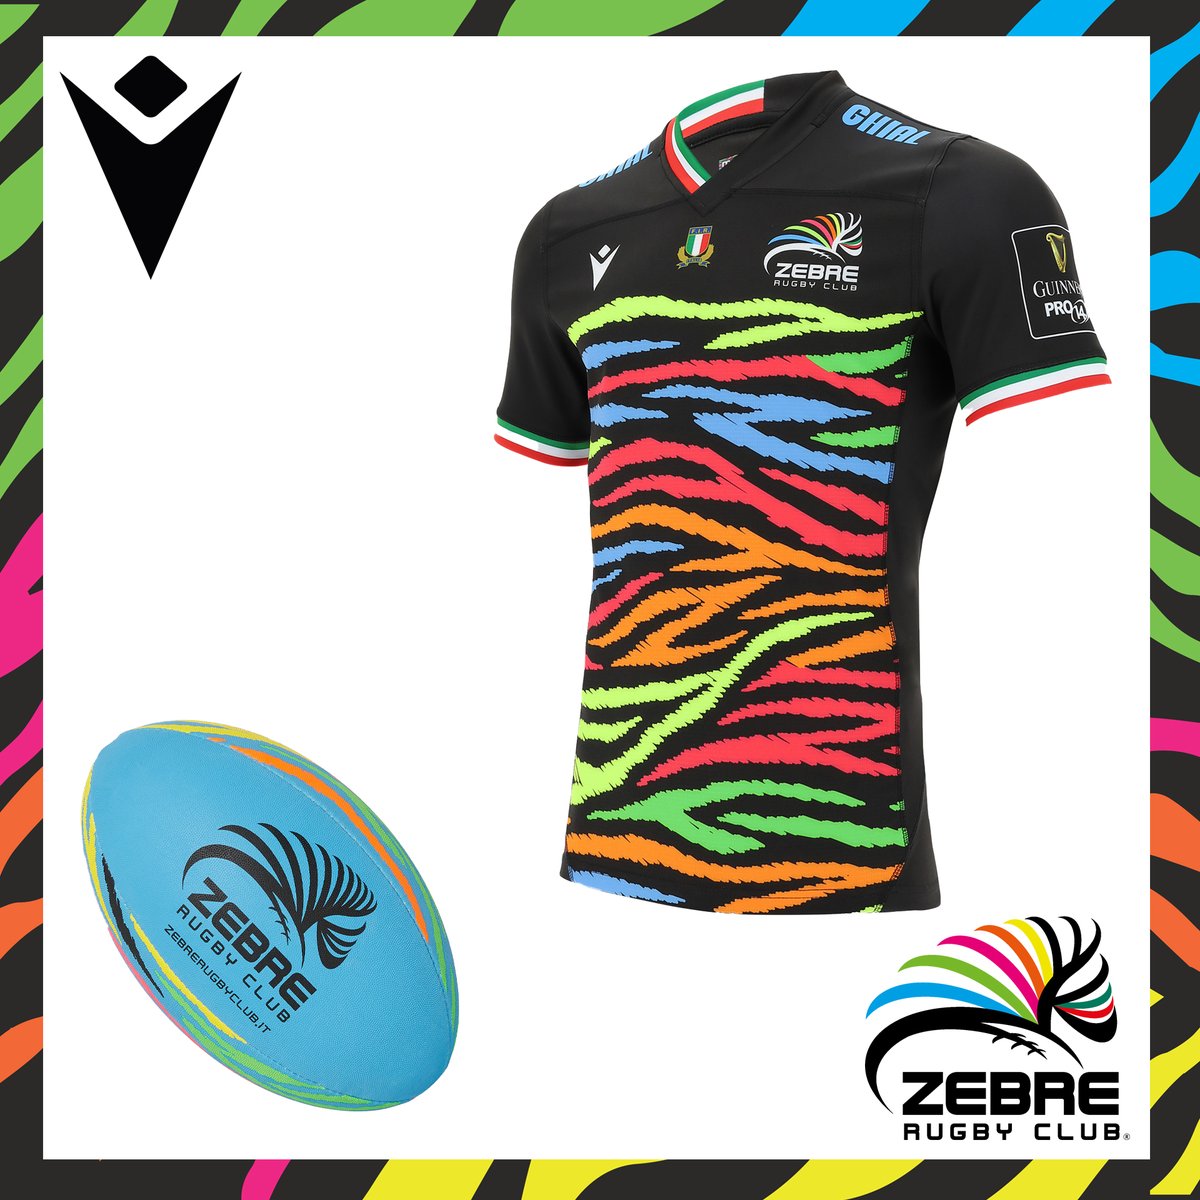 Zebre Rugby Club 𝗭𝗘𝗕𝗥𝗘 𝗥𝗨𝗚𝗕𝗬 Macronsports 𝗦𝗧𝗢𝗥𝗘 𝗔𝗪𝗔𝗜𝗧𝗦 𝗬𝗢𝗨 𝗢𝗡𝗟𝗜𝗡𝗘 Shop The New 21 Rugby Jerseys Restwear And Accessories Shipping To Take A Look To All The